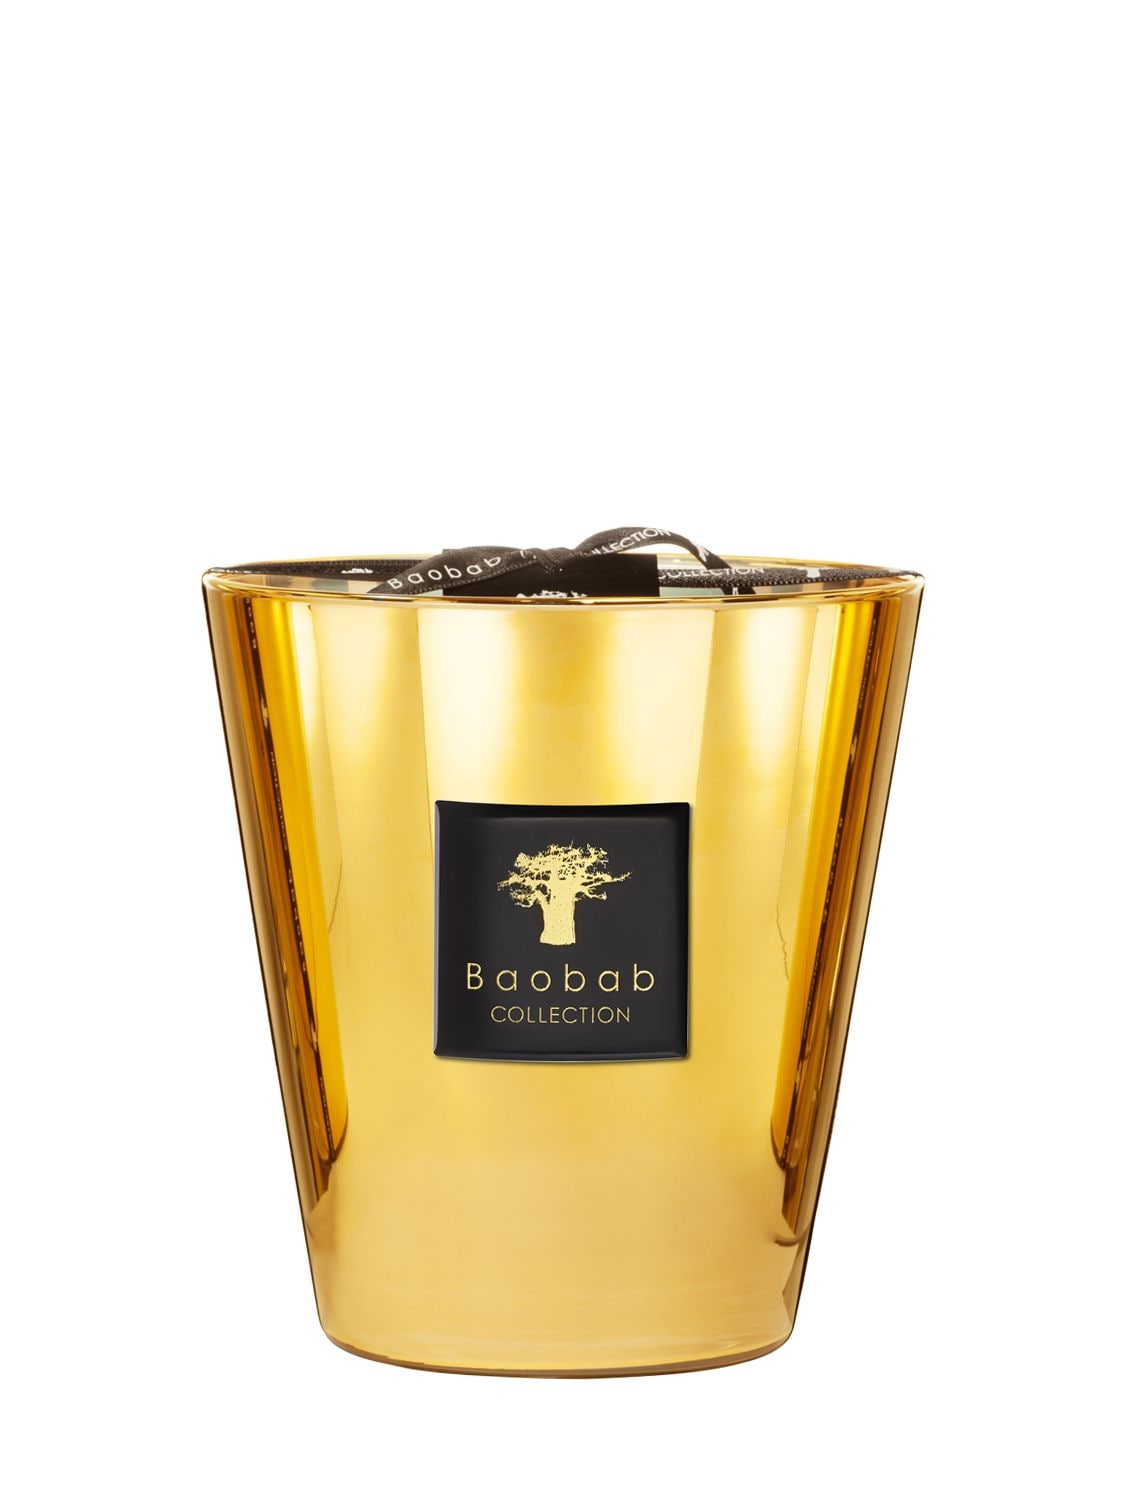 Baobab Collection 1.1kg Aurum Candle In Gold